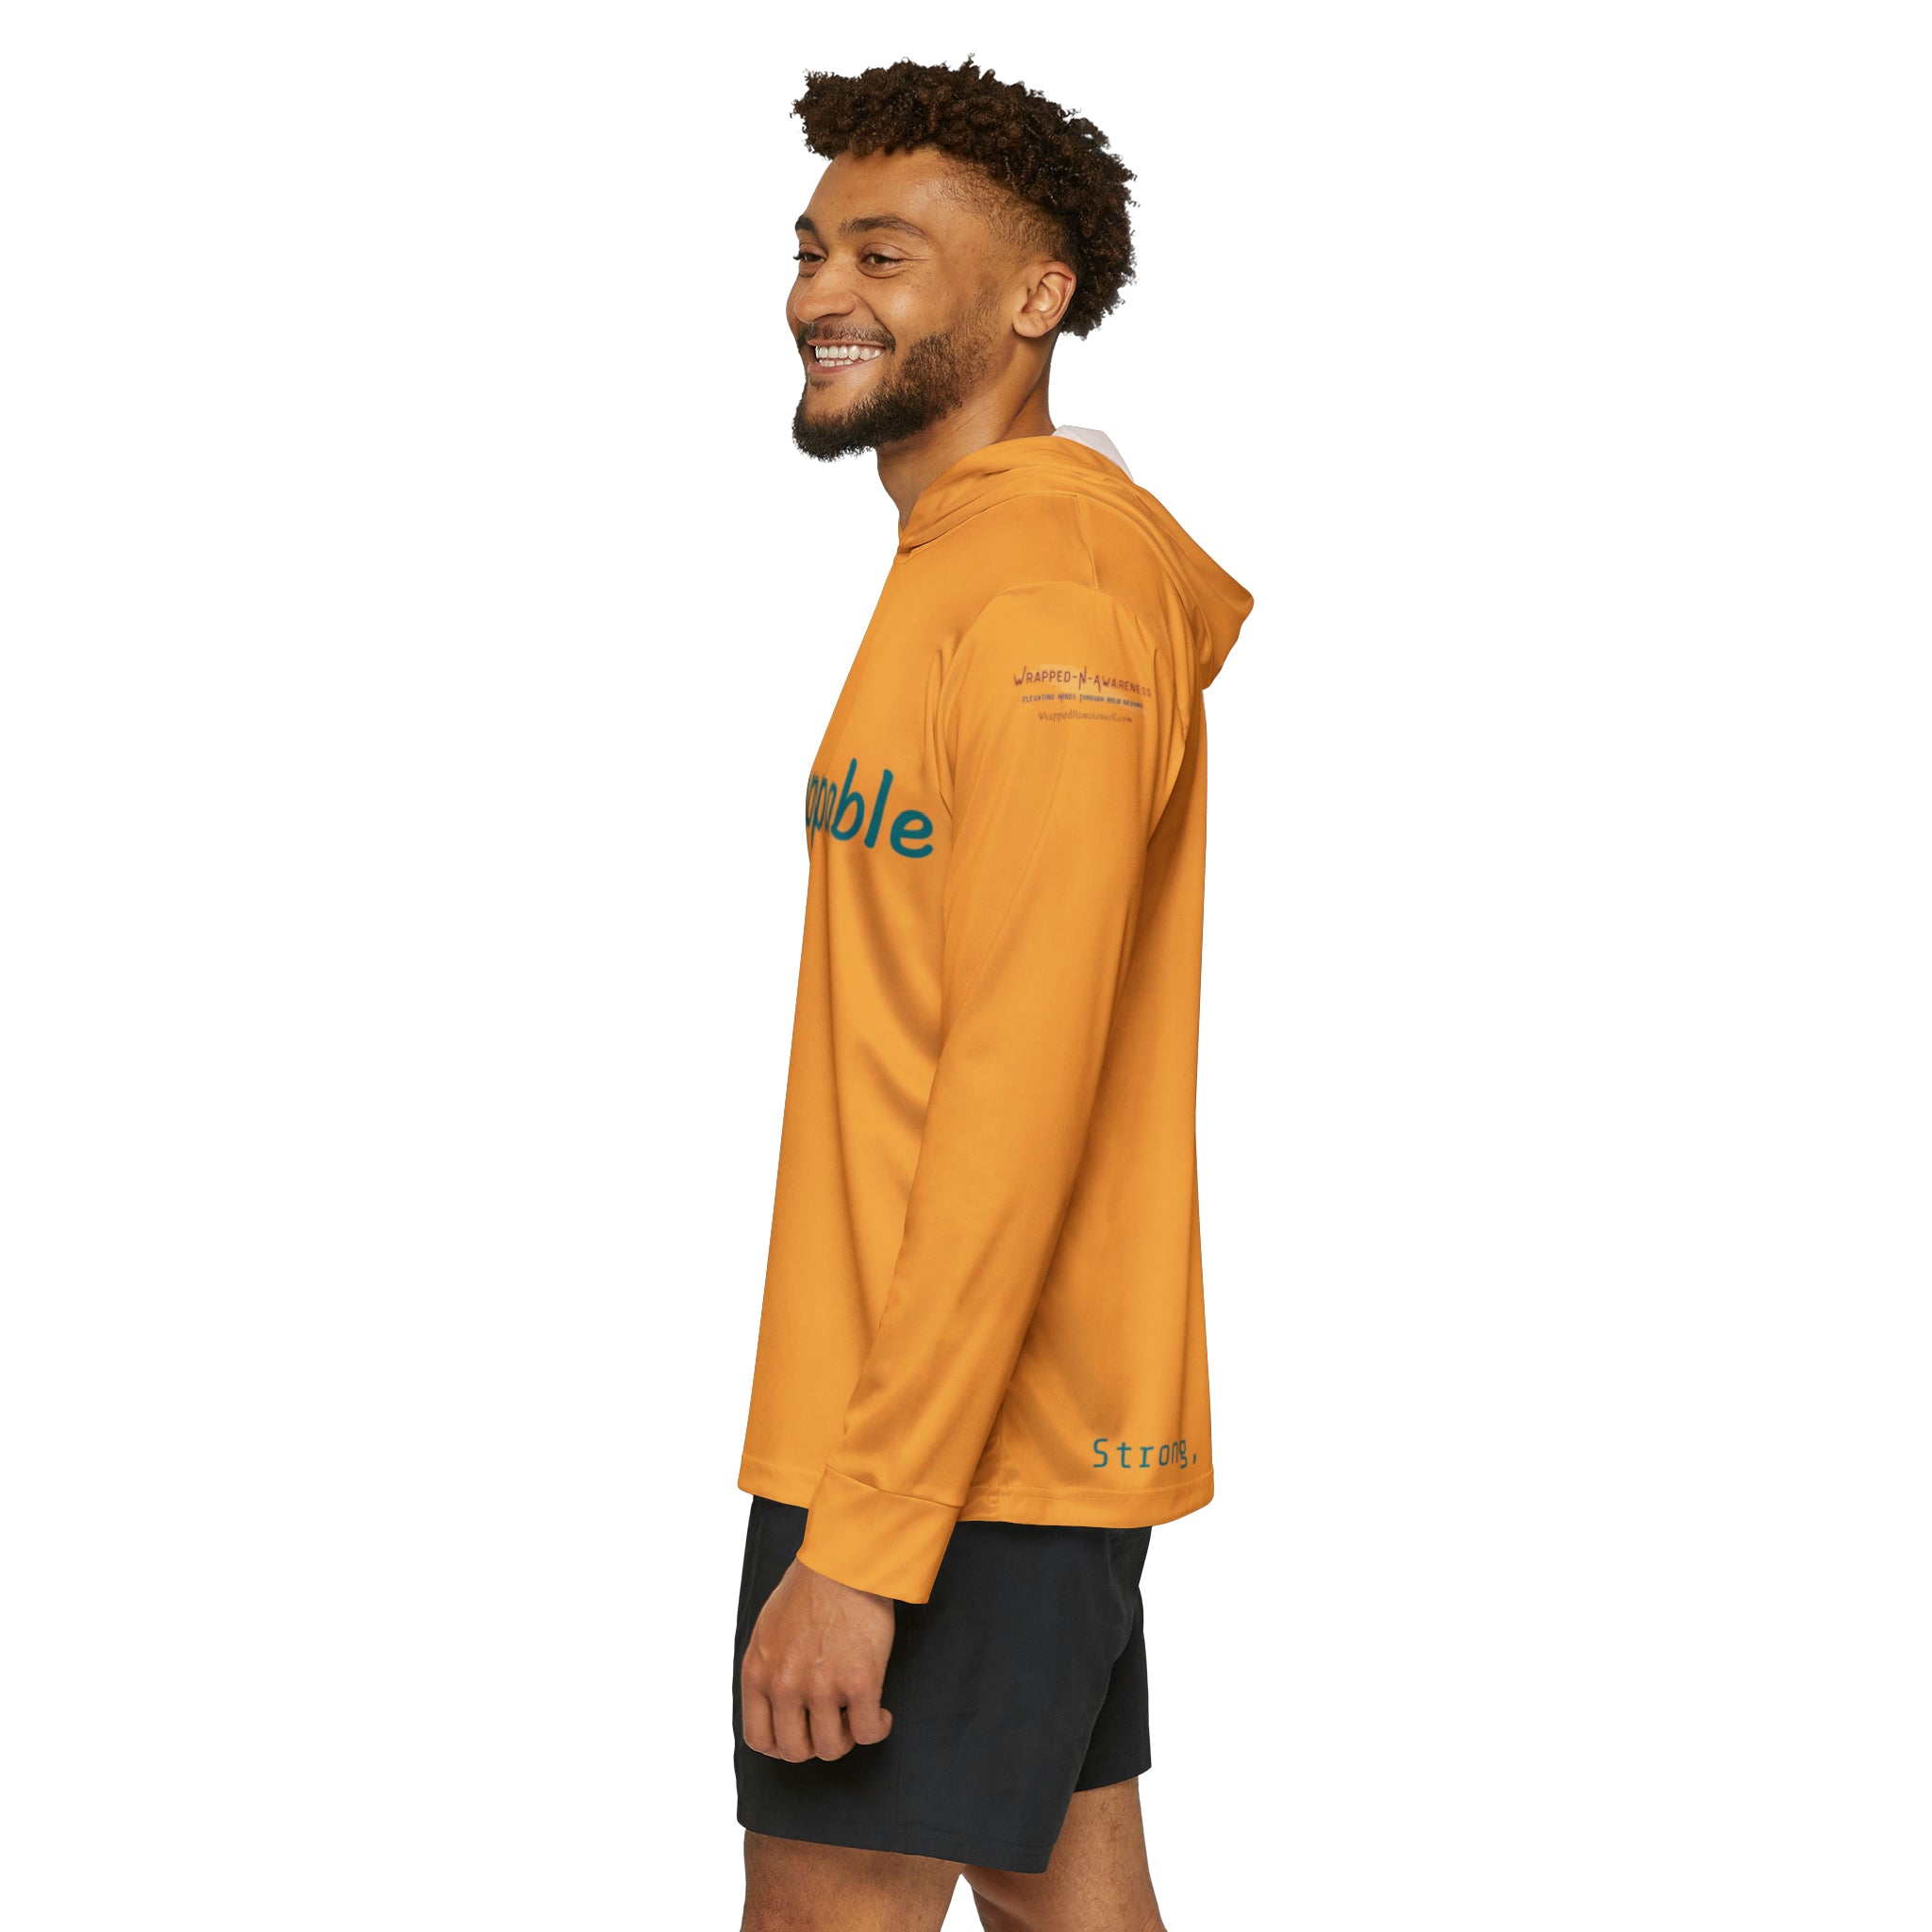 Unstoppable Men's Warmup Hoodie: Break Barriers Activewear Durable Fabric Made in USA Men's Hoodie Mental Health Support Moisture-wicking Performance Apparel Quality Control Sports Warmup UPF 50+ All Over Prints 5798616054288182074_2048 Printify